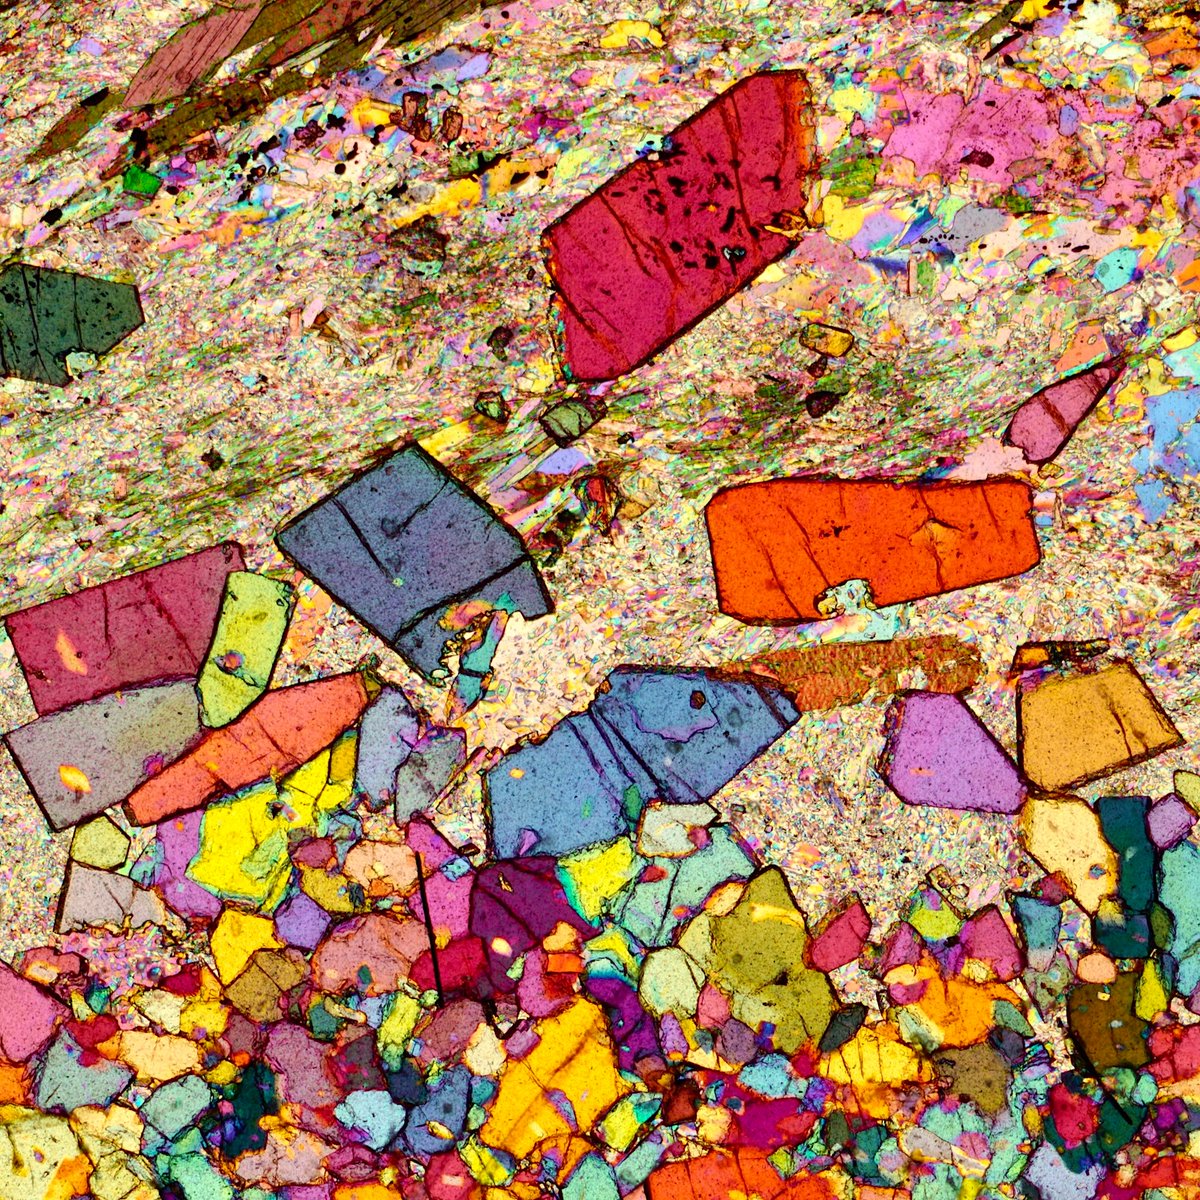 More of the lovely staurolite aggregates in the metapelites from the the Vedrette di Ries contact aureole (eastern Alps, Italy). Crossed polars and lambda plates. Width 1.5 mm. #science #geology #rocks #minerals #Alps #colors #staurolite #microscope #photography